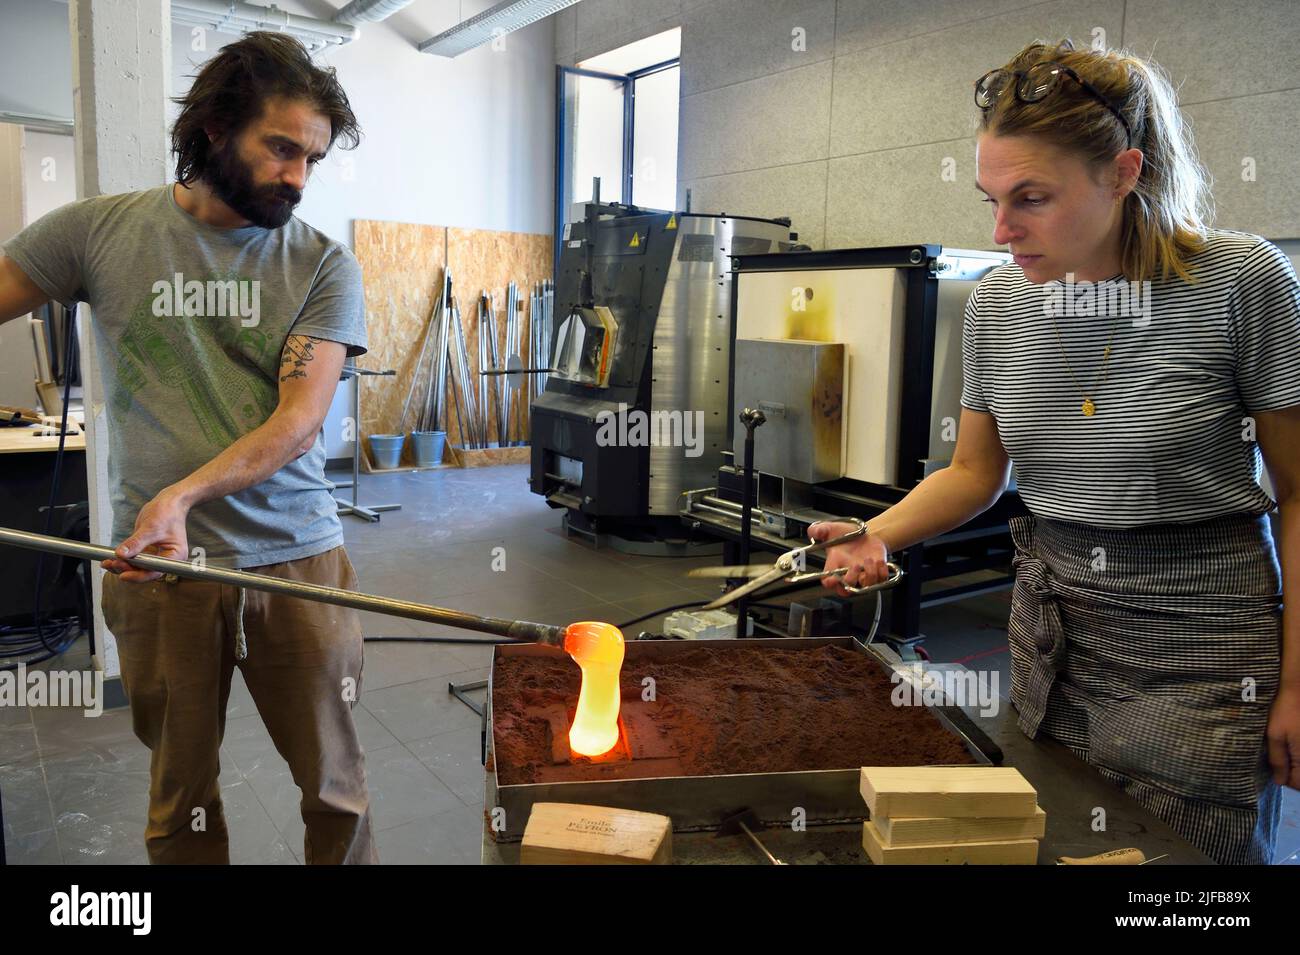 France, Charente, Cognac, Fondation d'Entreprise Martell, multidisciplinary cultural institution (art, design and craft, architecture, music, dance ...), designer Céline Thibault works with glass in the workshop of glass craftsmen Laetitia Andrighetto and Jean-Charles Miot Stock Photo